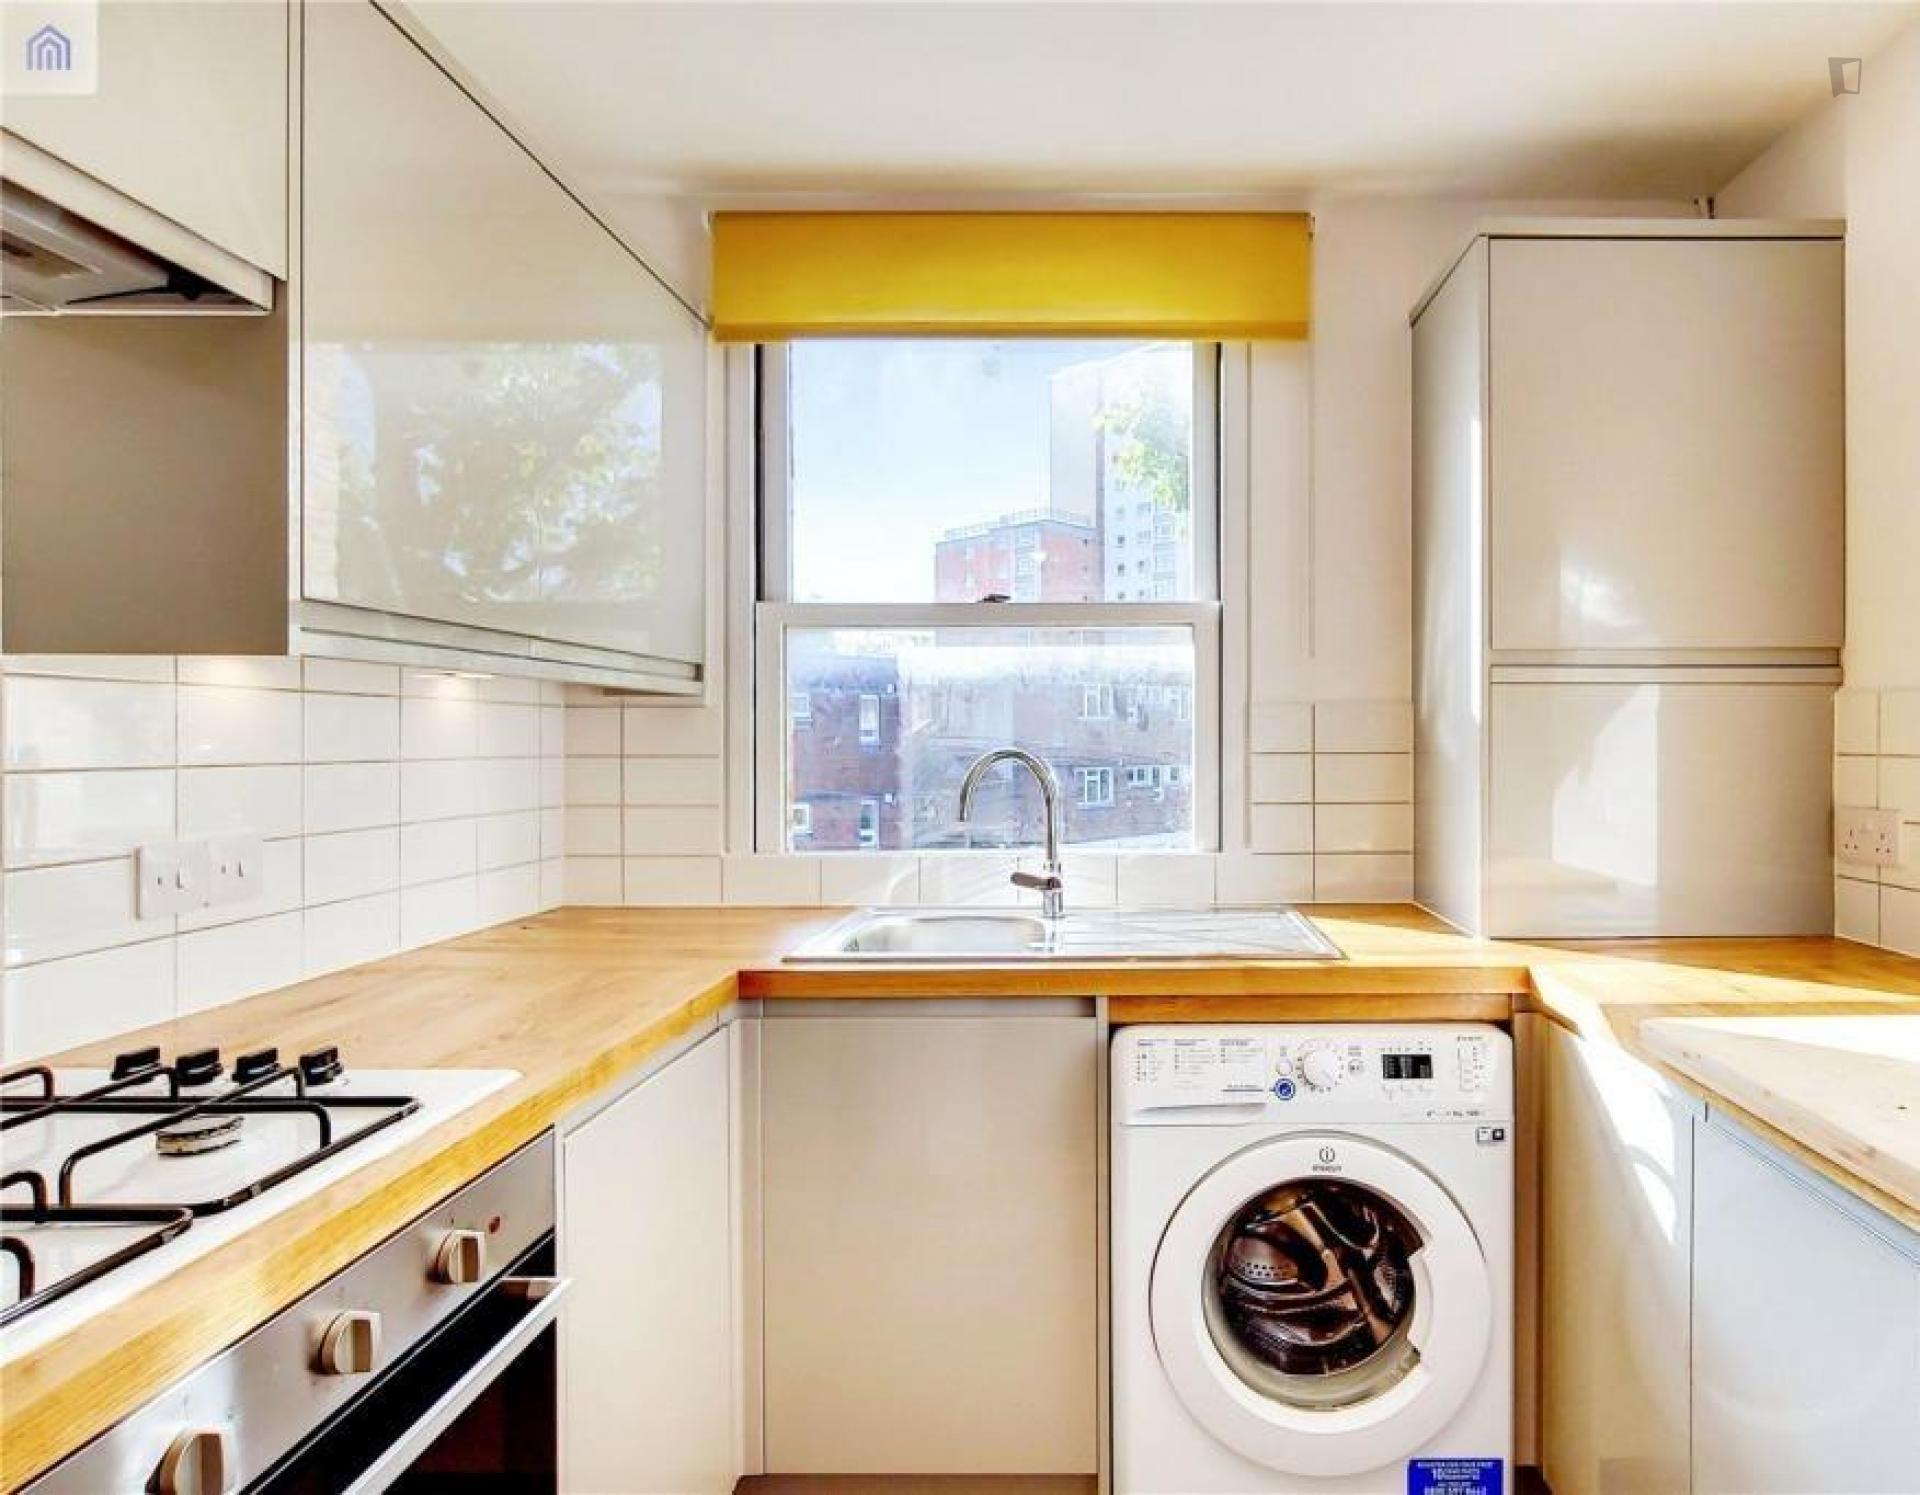 Grafton - Lovely furnished flat in London for expats